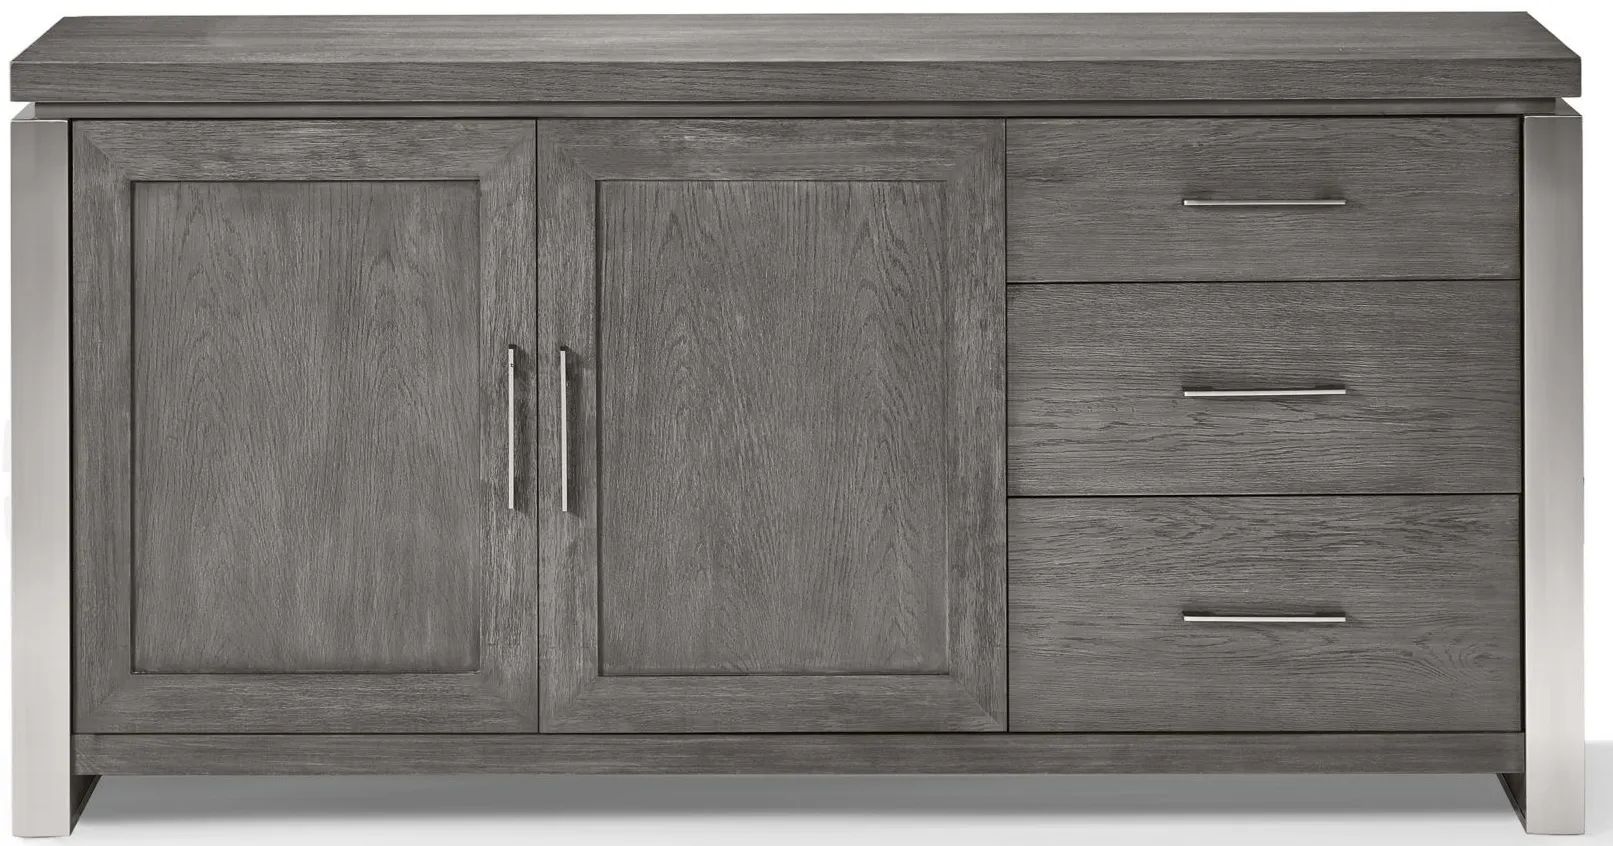 Plata Sideboard in Thunder Gray by Bellanest